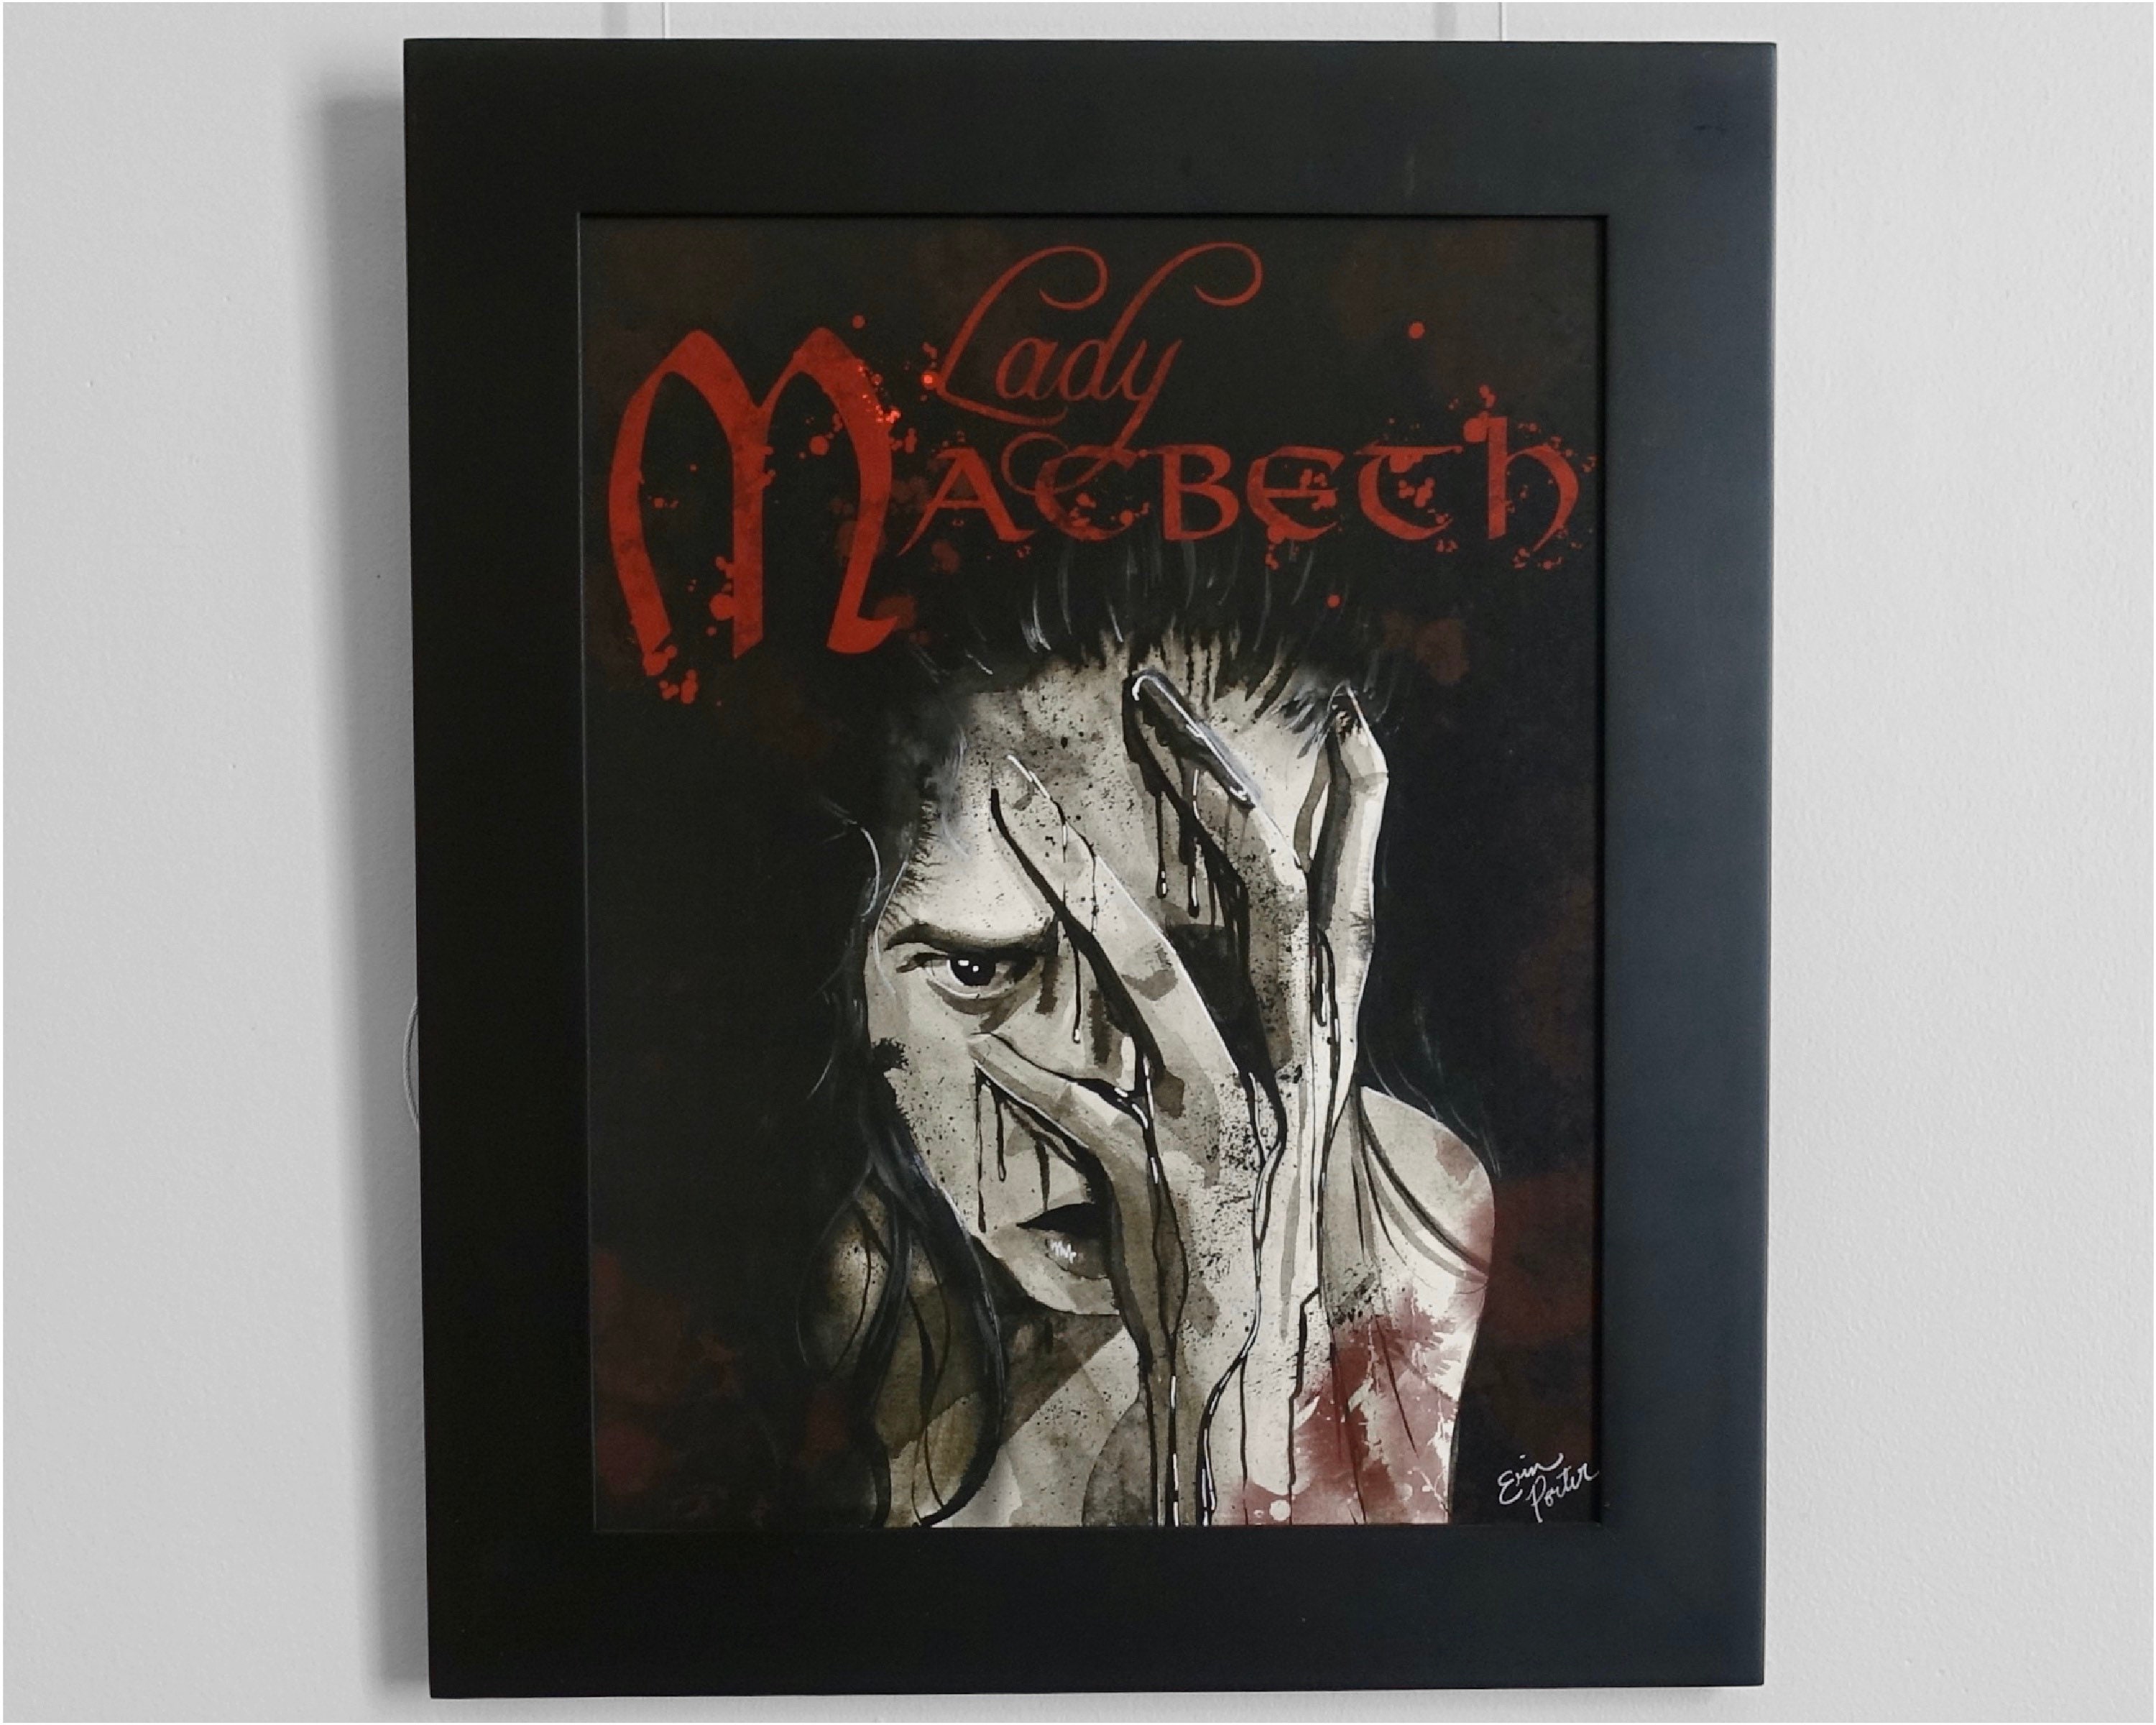 SHAKESPEARE: MACBETH. By William Shakespeare For sale as Framed Prints,  Photos, Wall Art and Photo Gifts